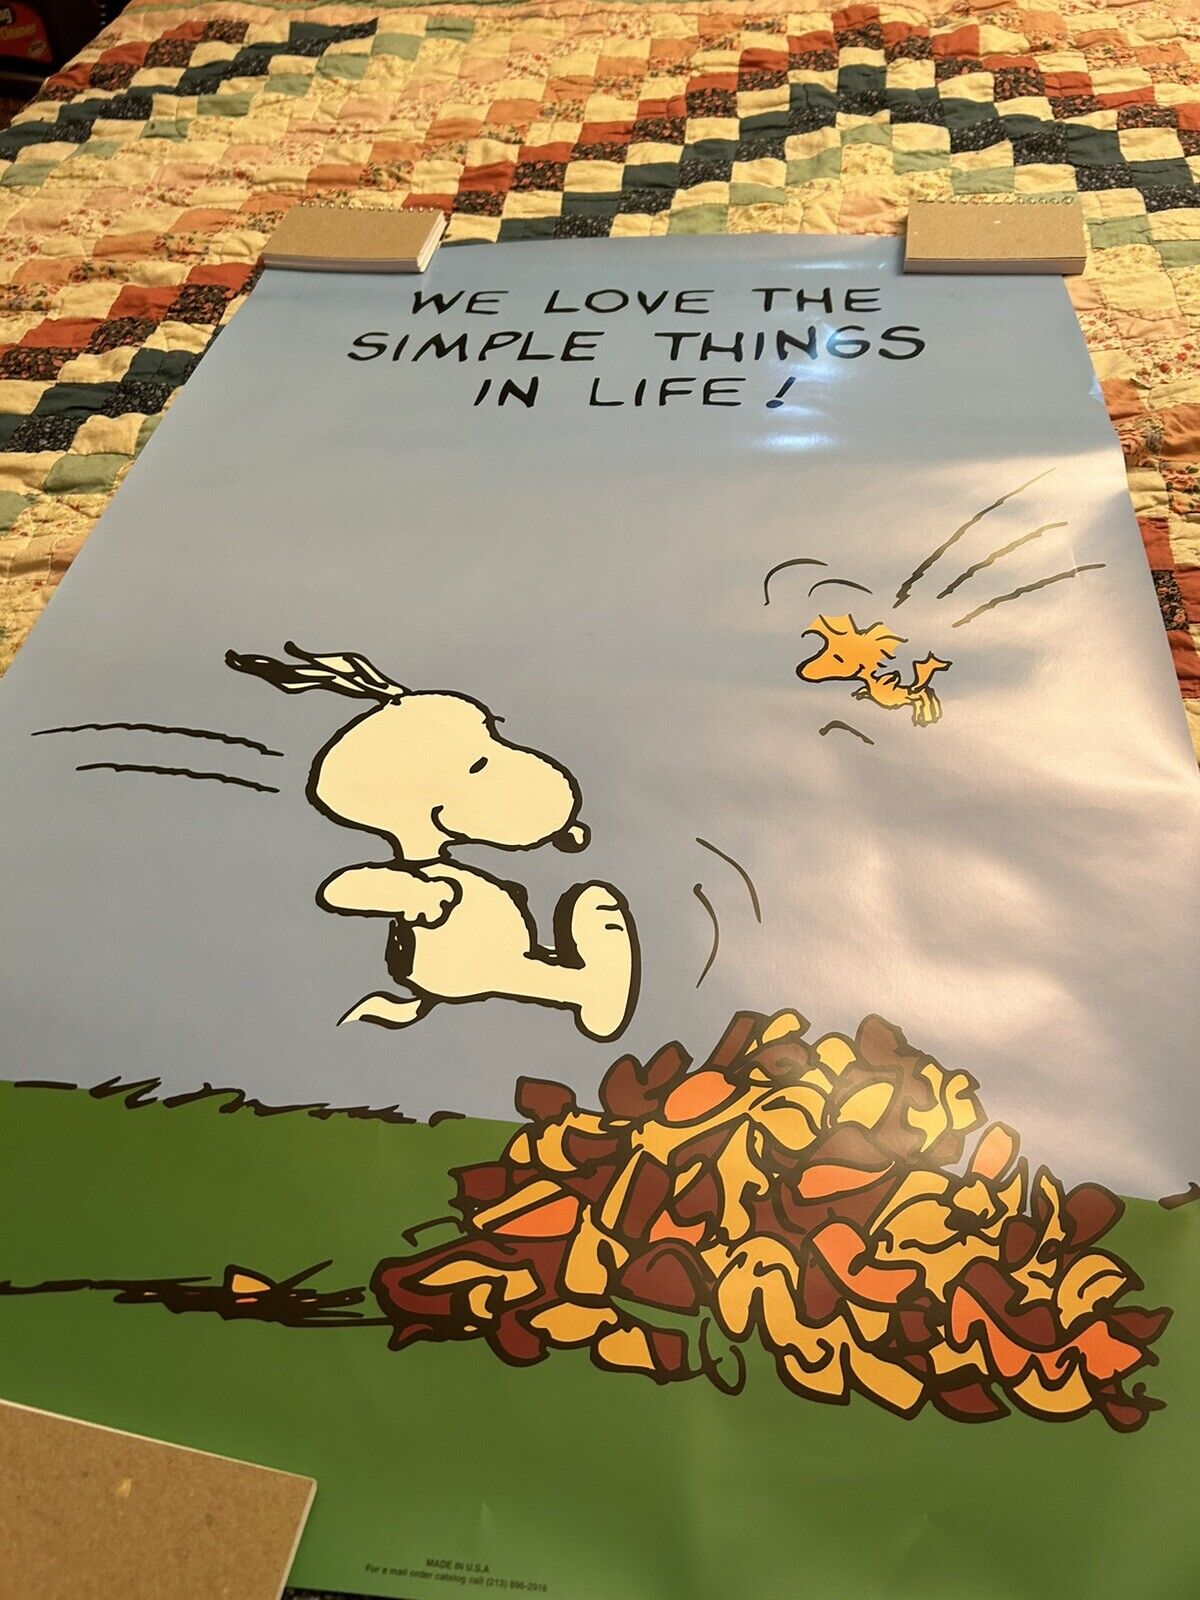 Peanuts Snoopy “We Love The Simple Things In Life” Poster 24x36